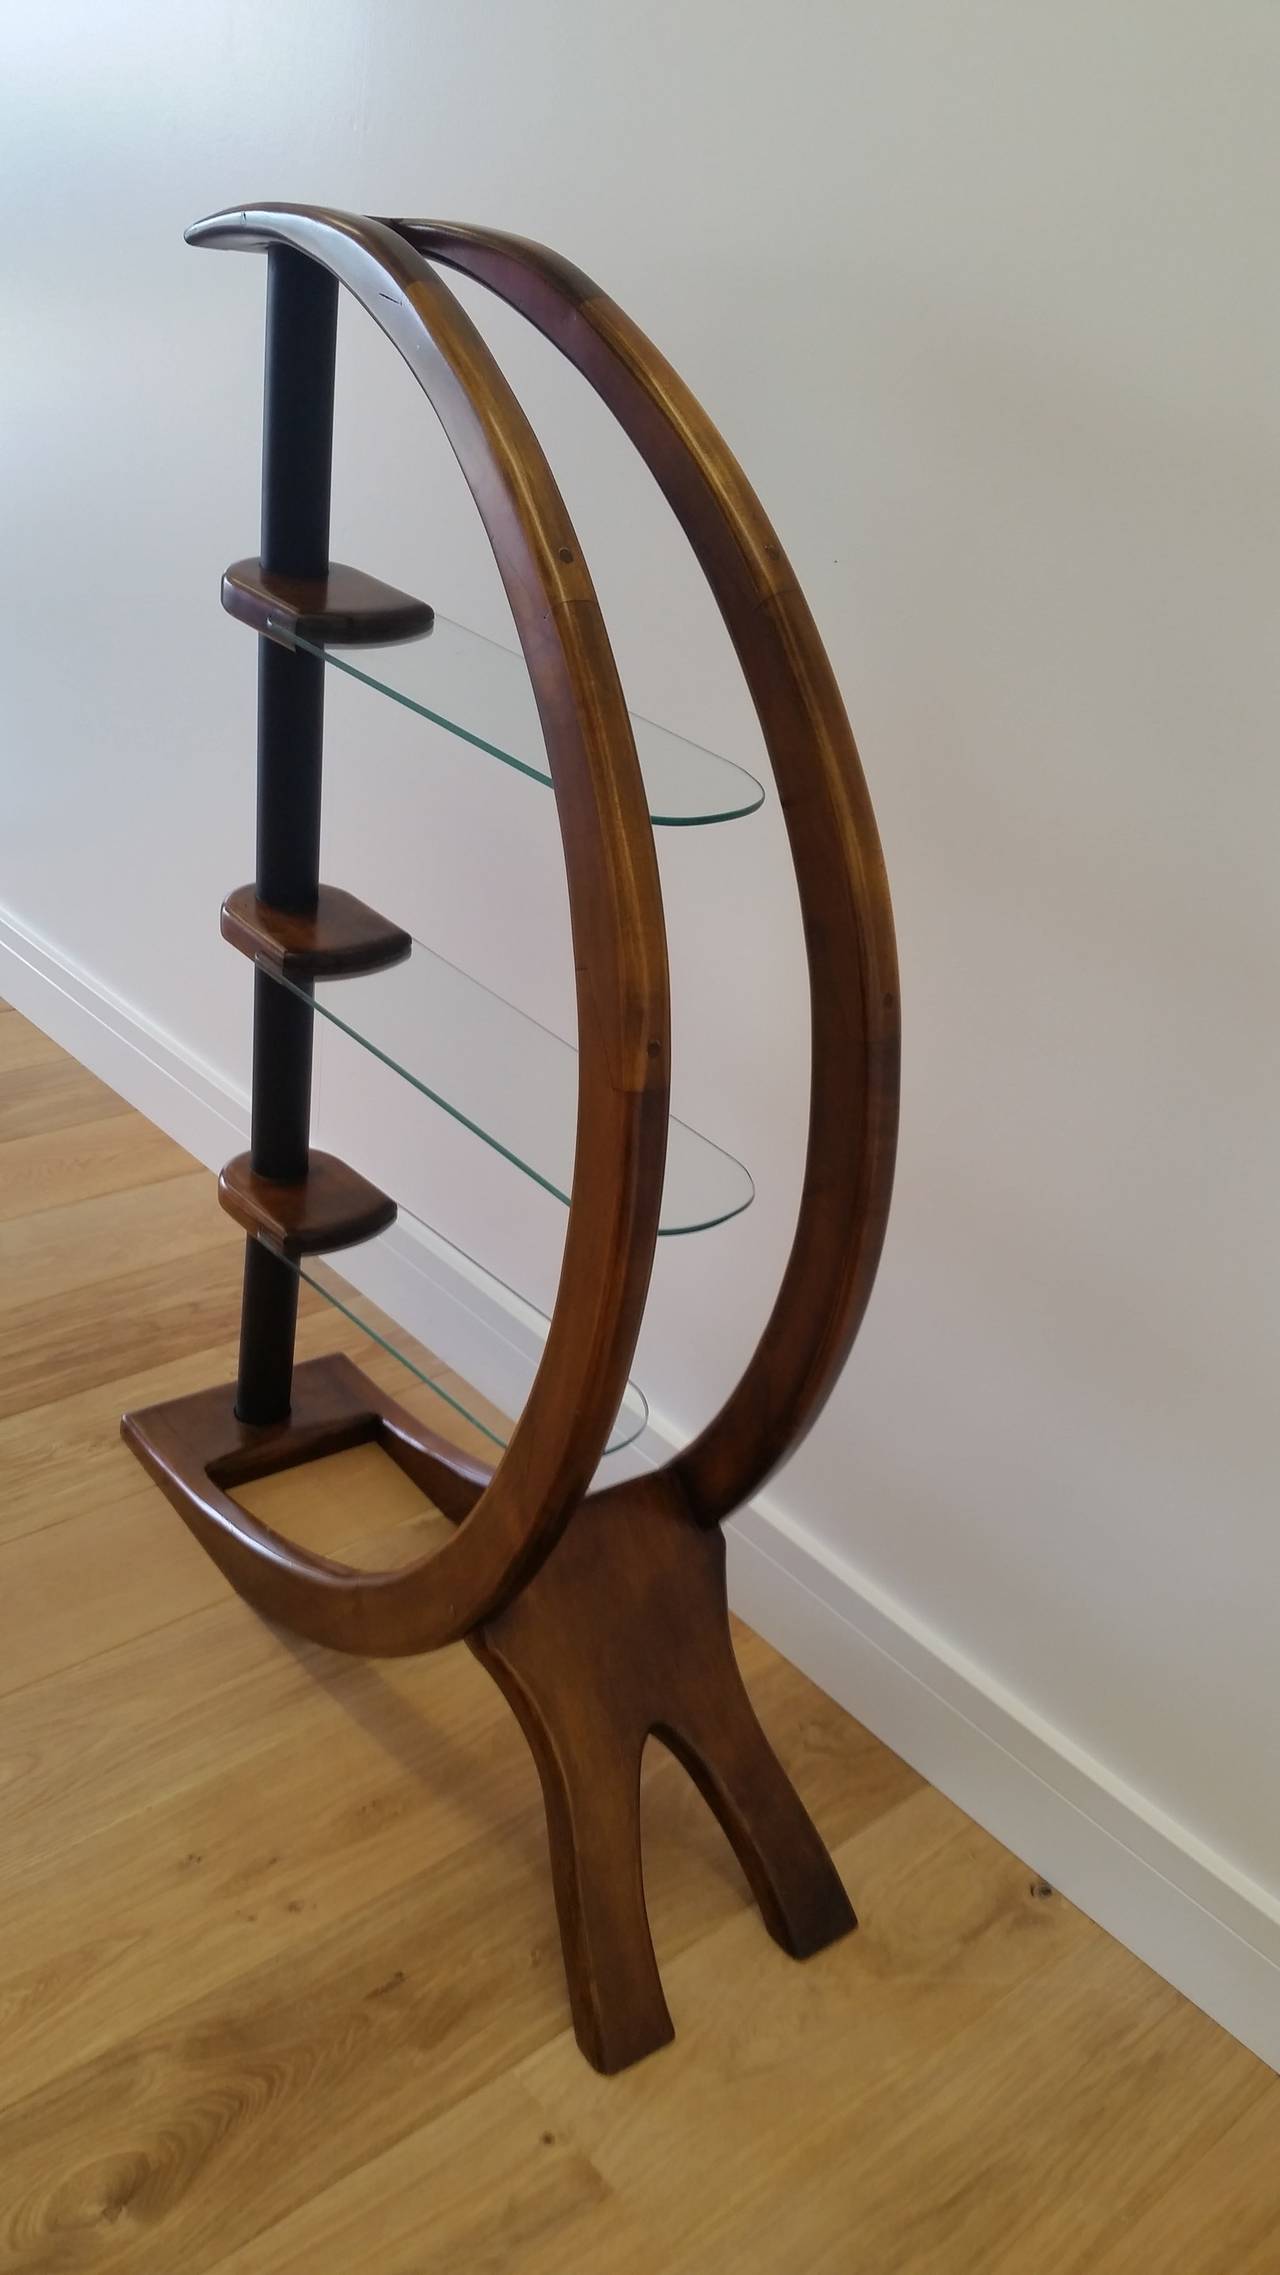 Mid-Century design freestanding adjustable shelving. 
Mid-20th century design at its best, this is a superb half-moon adjustable shelving, each of the three glass shelves can be angled to suite you, fabulous style to the angles curves yet remains